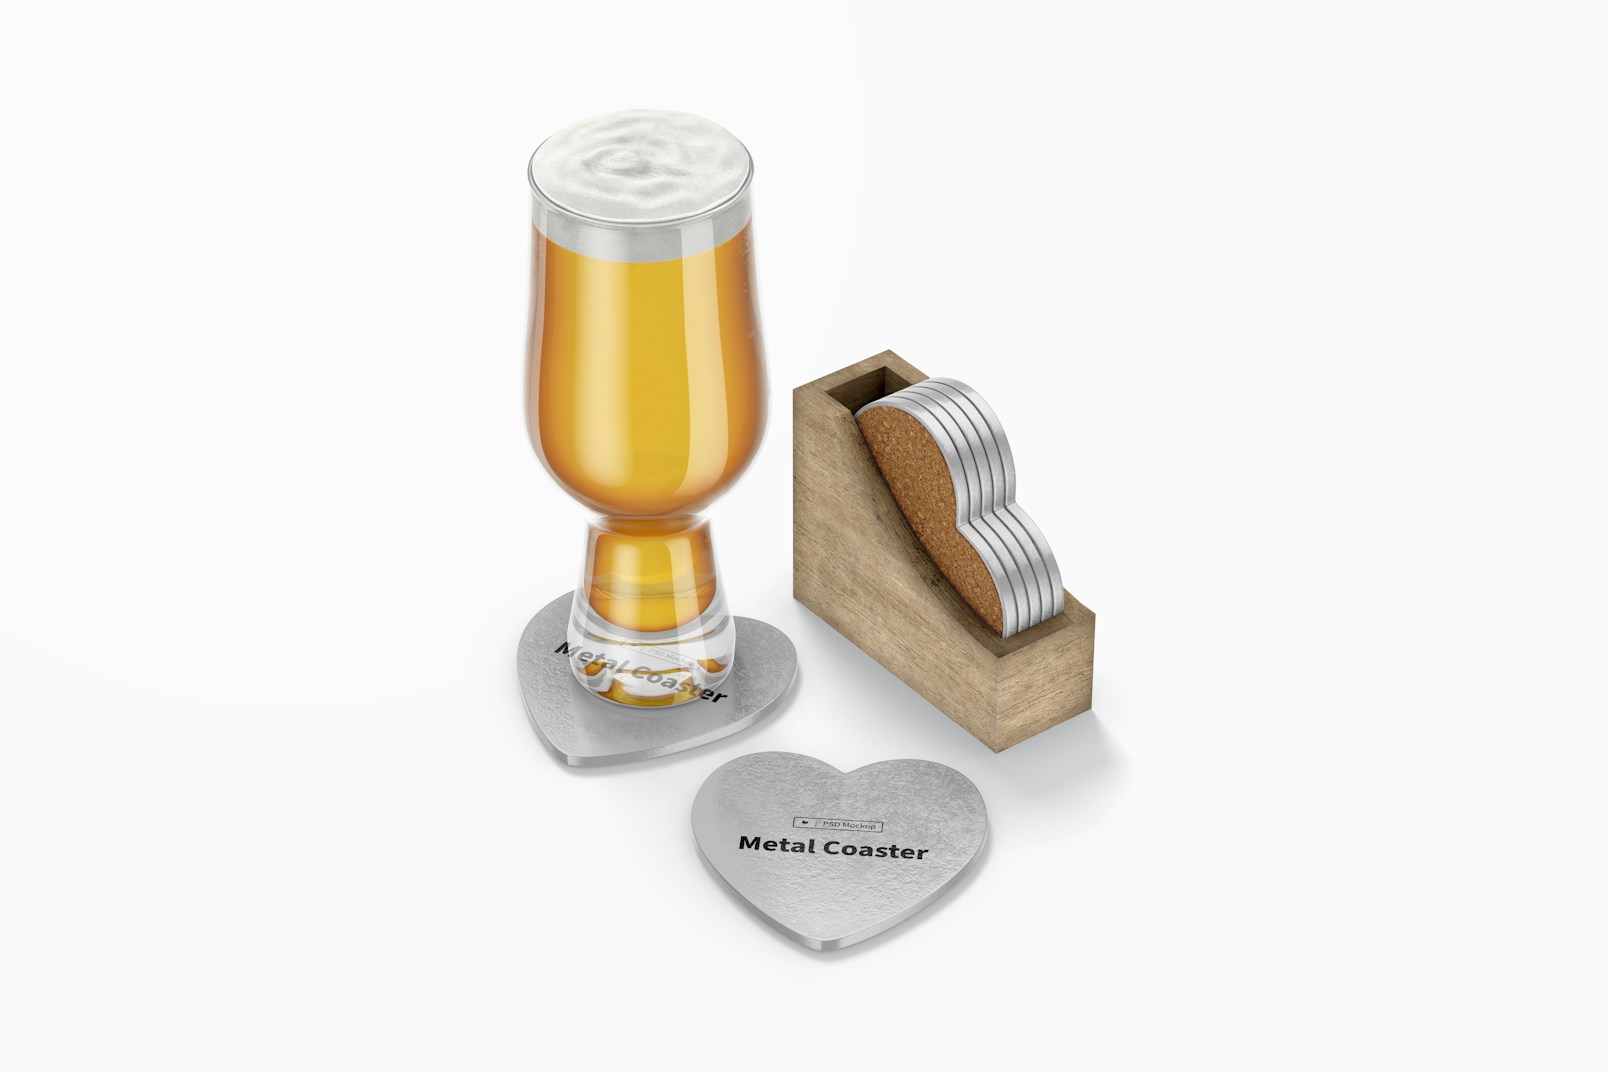 Heart Metal Coaster Mockup, with Beer Glass